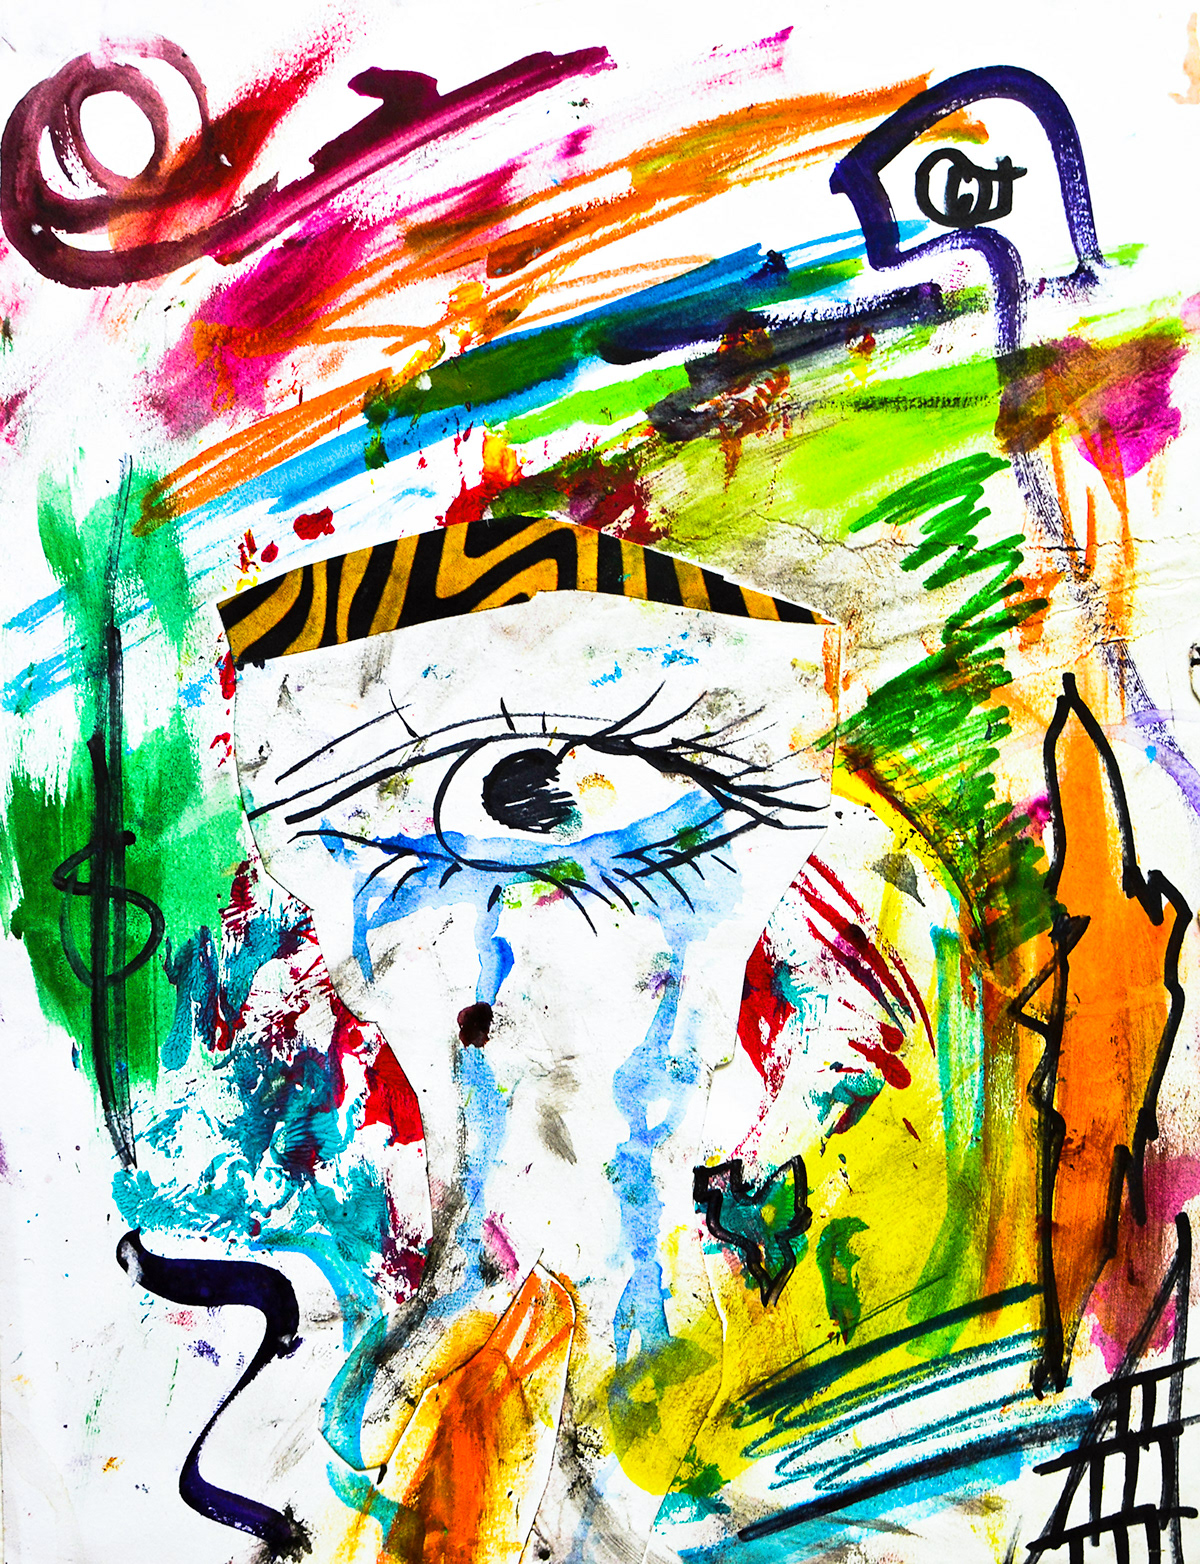 eyes money pyramids illuminati color chaos intuitive conscious enlightened third eye rva Philly nyc trippy watercolor